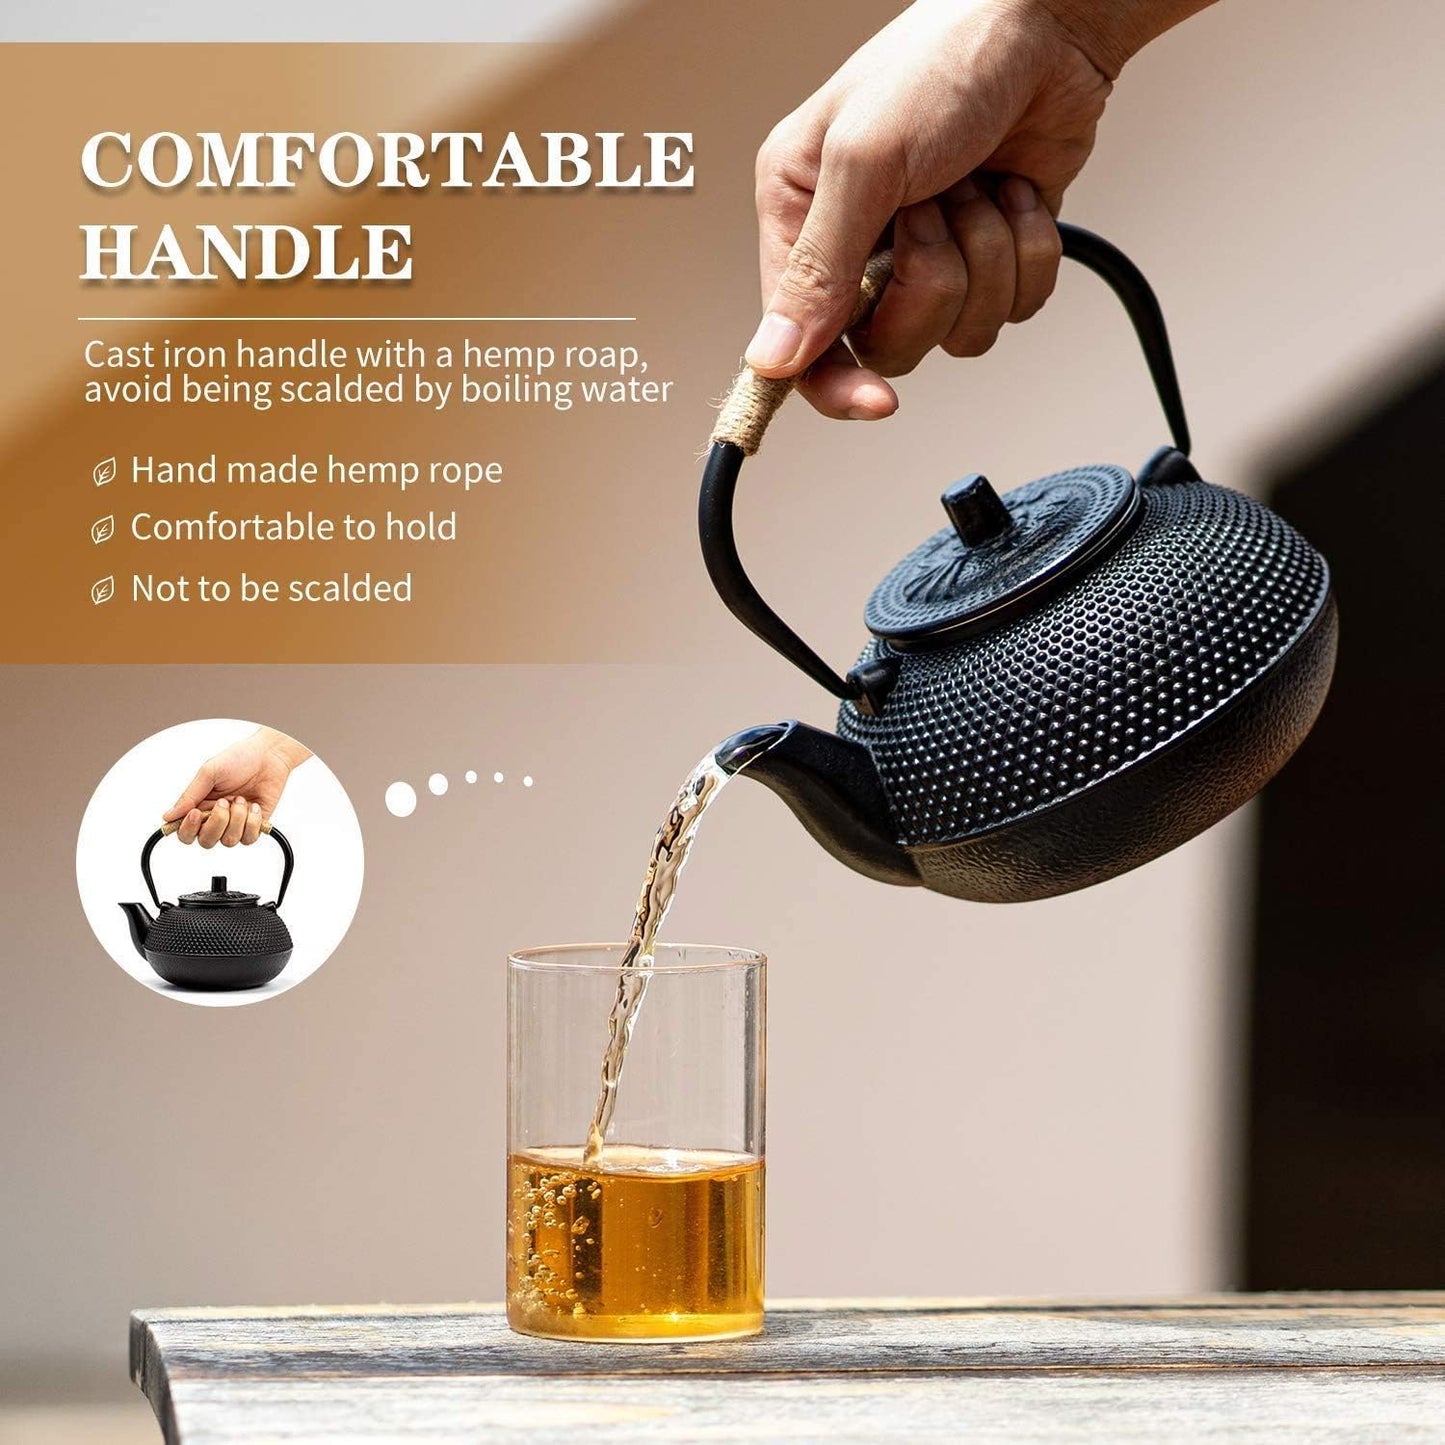 Japanese Tetsubin Cast Iron Teapot with Infuser, for Stovetop Safe